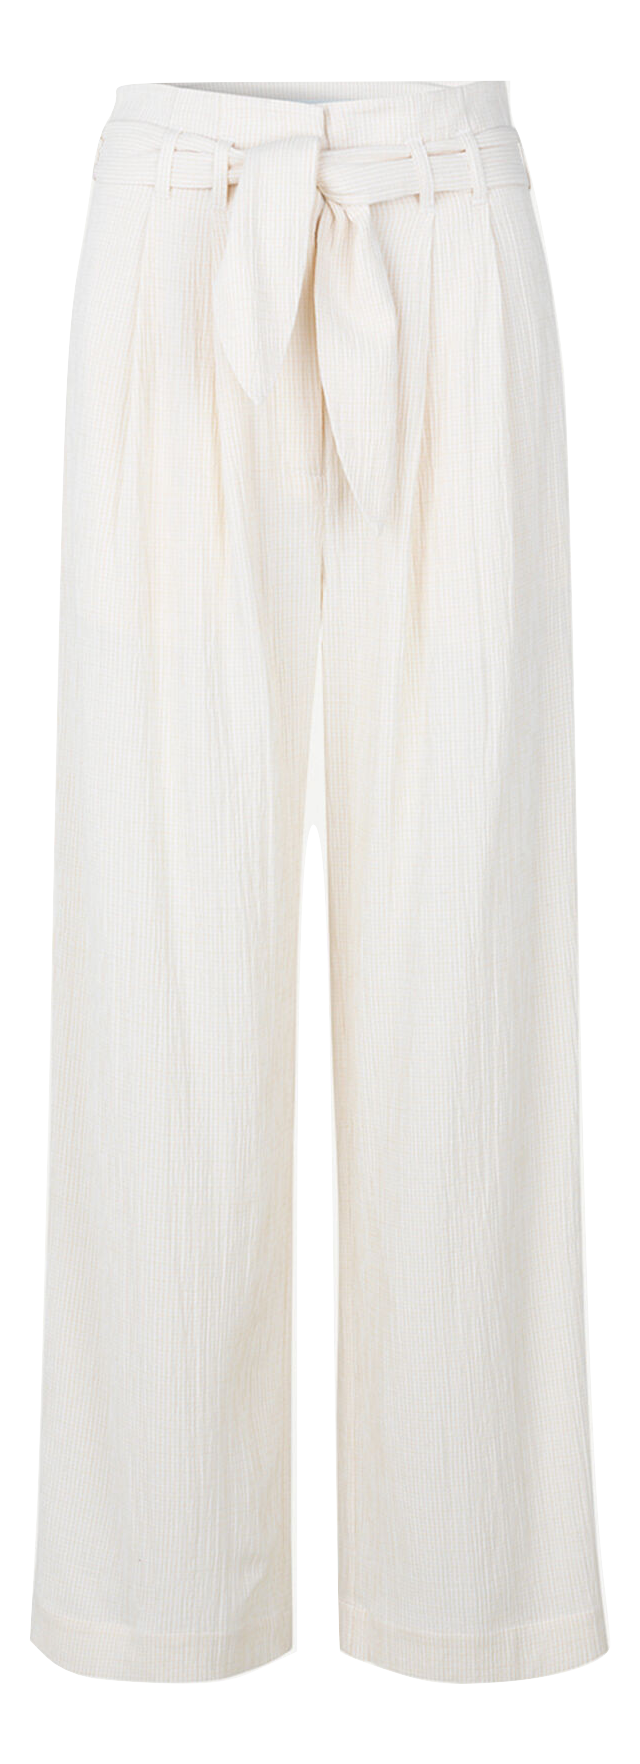 Nellie trousers